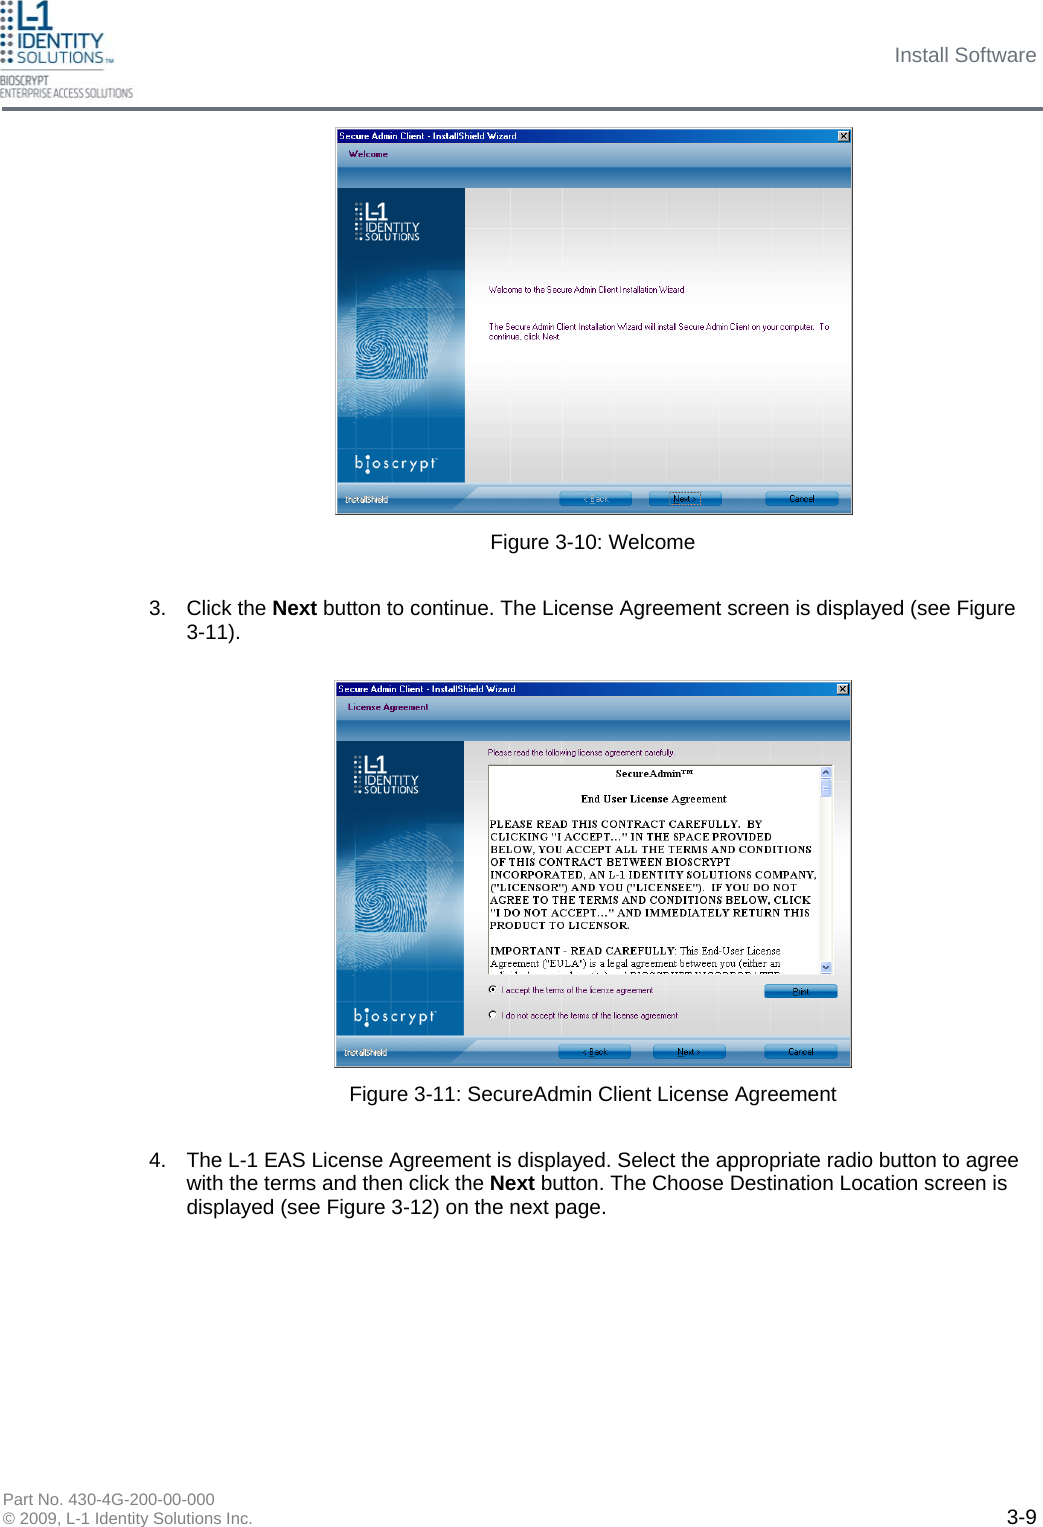 Install Software Part No. 430-4G-200-00-000 © 2009, L-1 Identity Solutions Inc.  3-9 3. Click the Next button to continue. The License Agreement screen is displayed (see Figure 3-11). Figure 3-10: Welcome Figure 3-11: SecureAdmin Client License Agreement 4.  The L-1 EAS License Agreement is displayed. Select the appropriate radio button to agree with the terms and then click the Next button. The Choose Destination Location screen is displayed (see Figure 3-12) on the next page.  